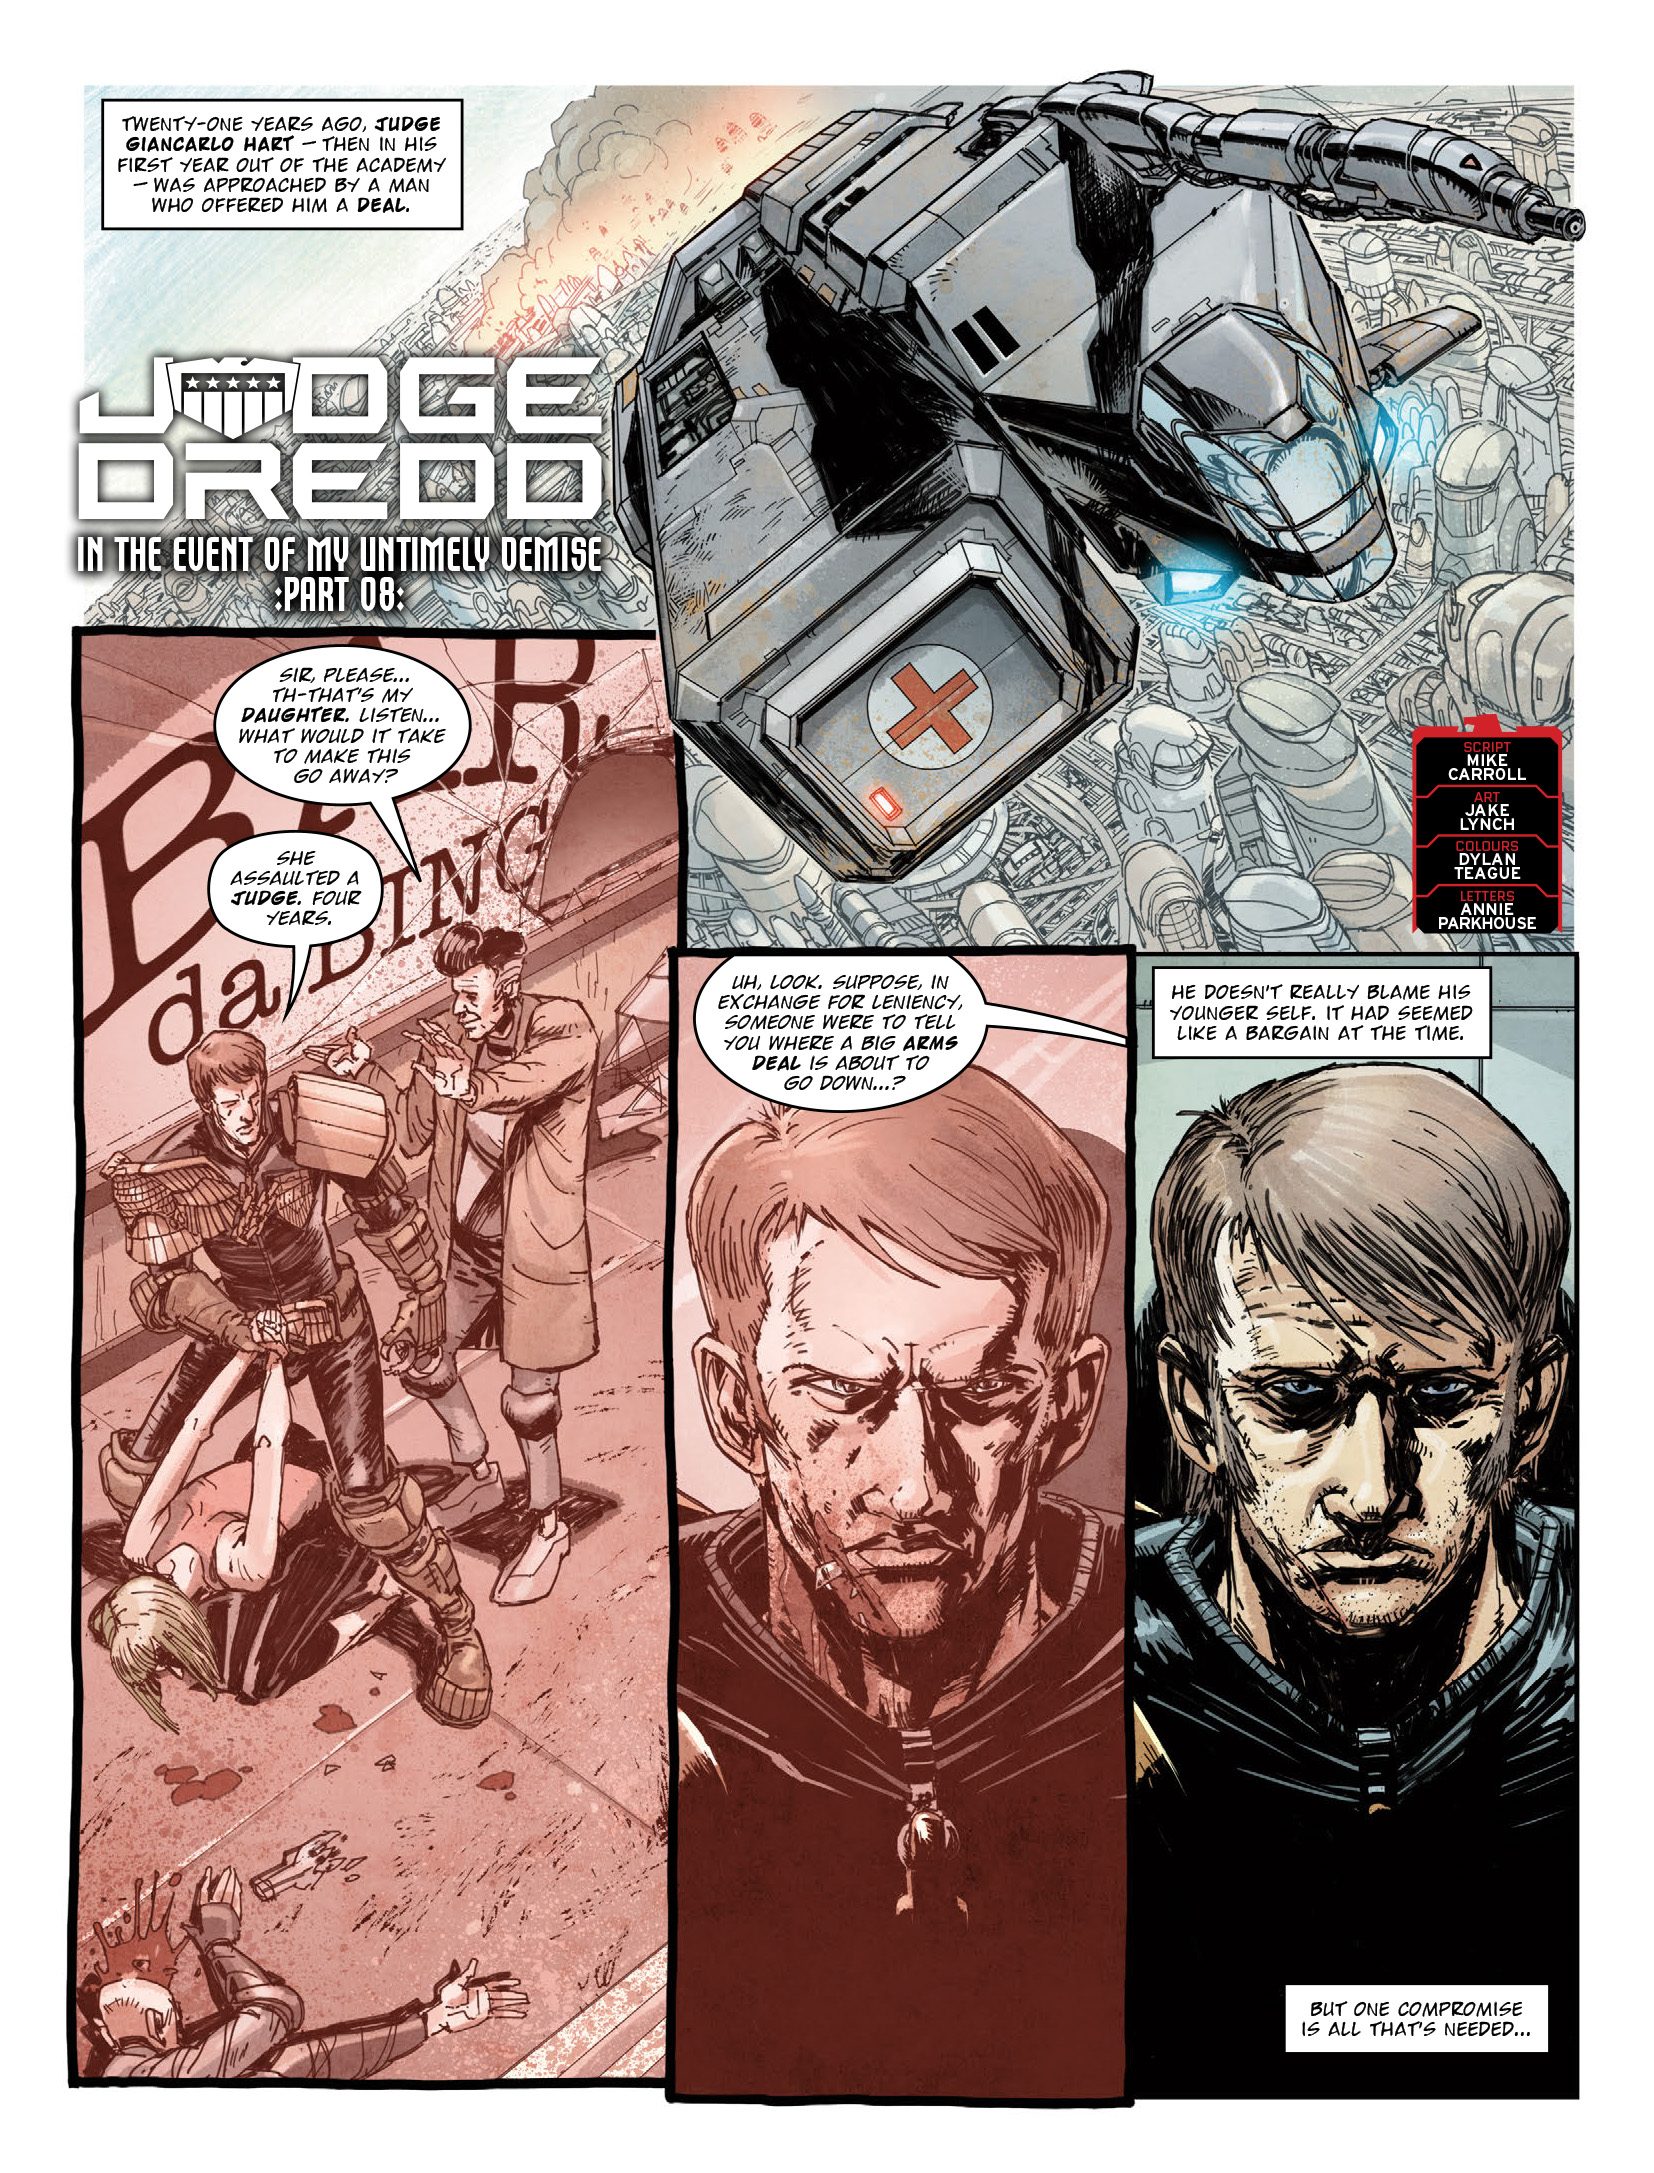 2000 AD: Chapter 2340 - Page 3